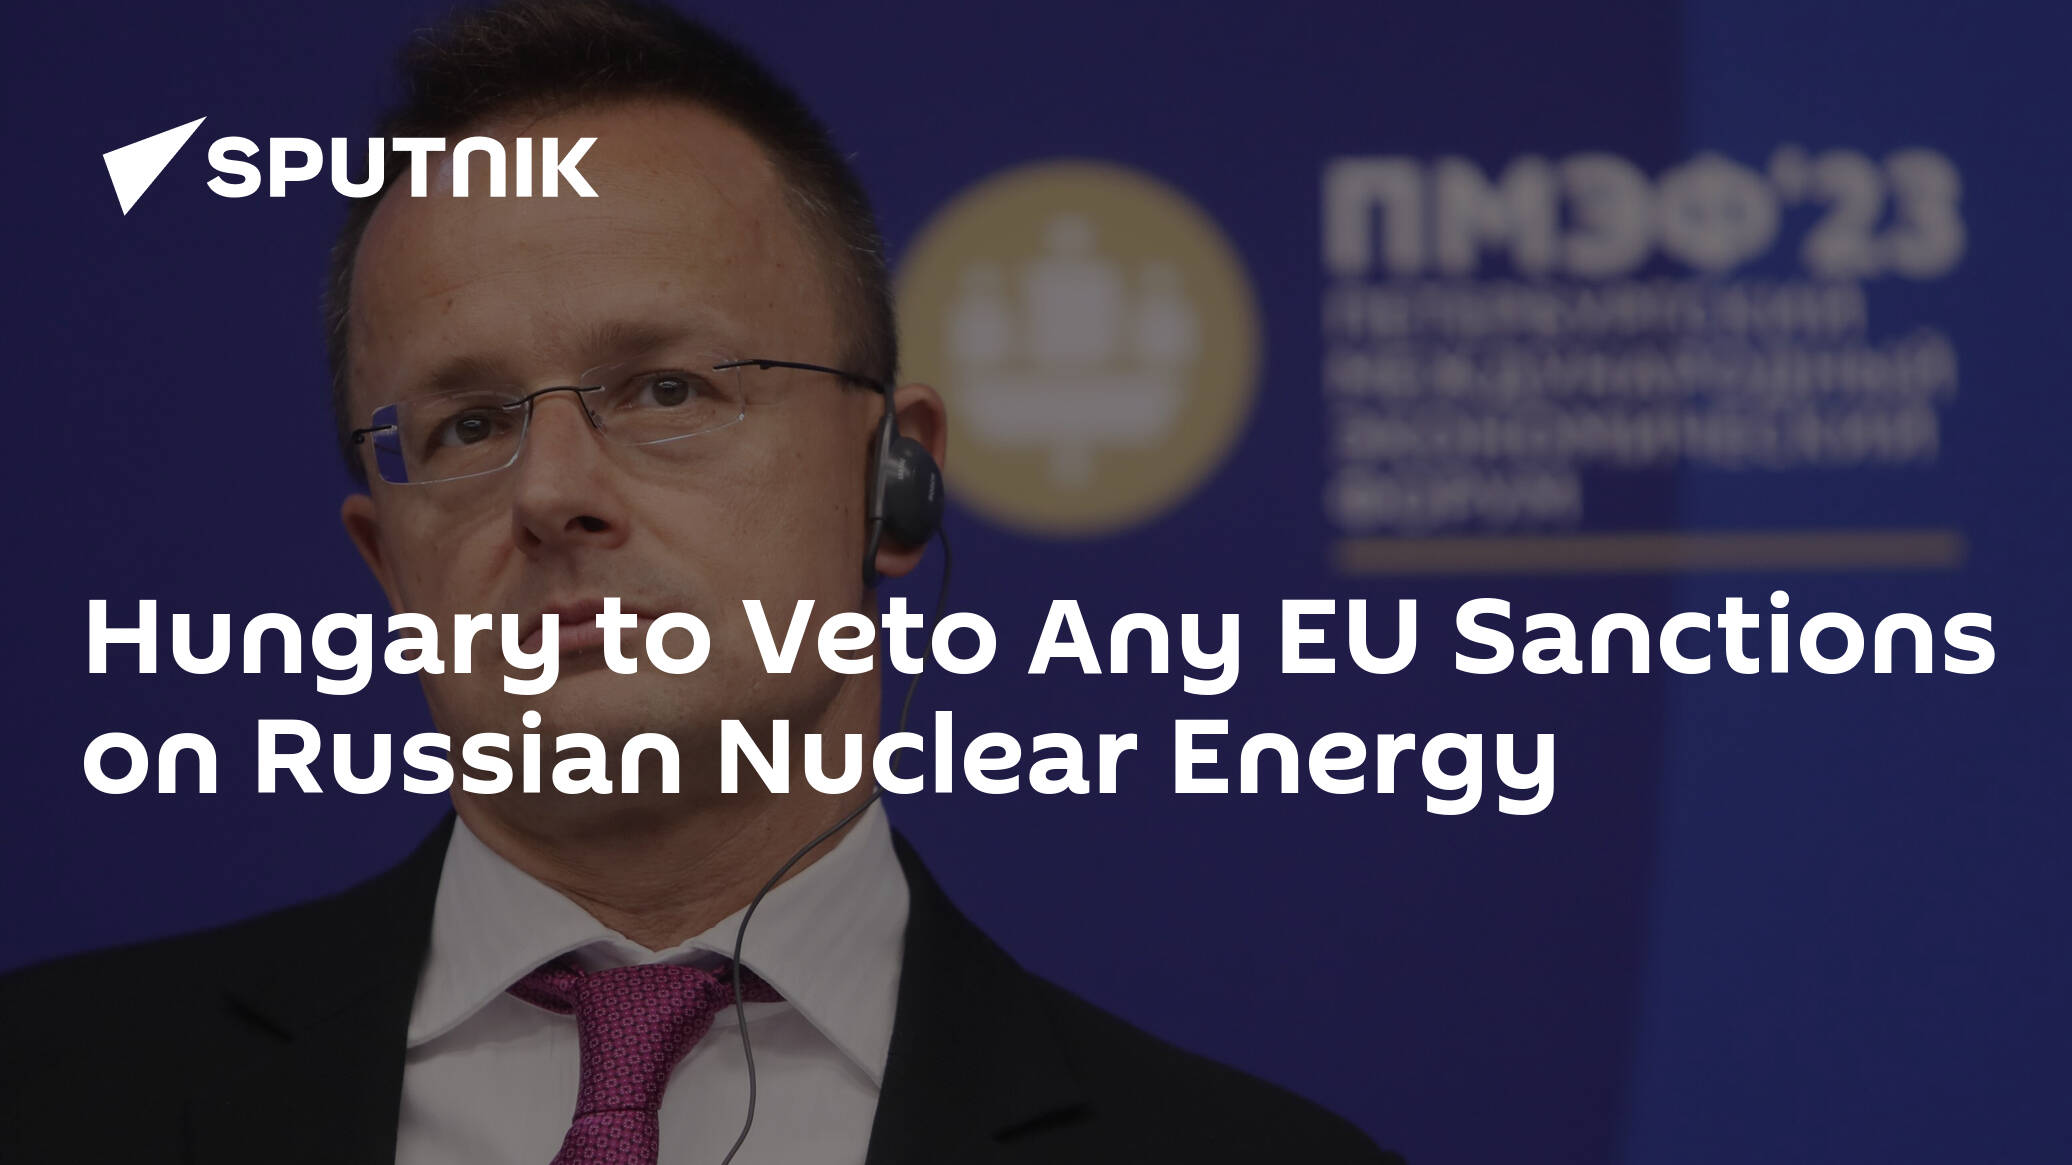 Hungary to Veto Any EU Sanctions on Russian Nuclear Energy